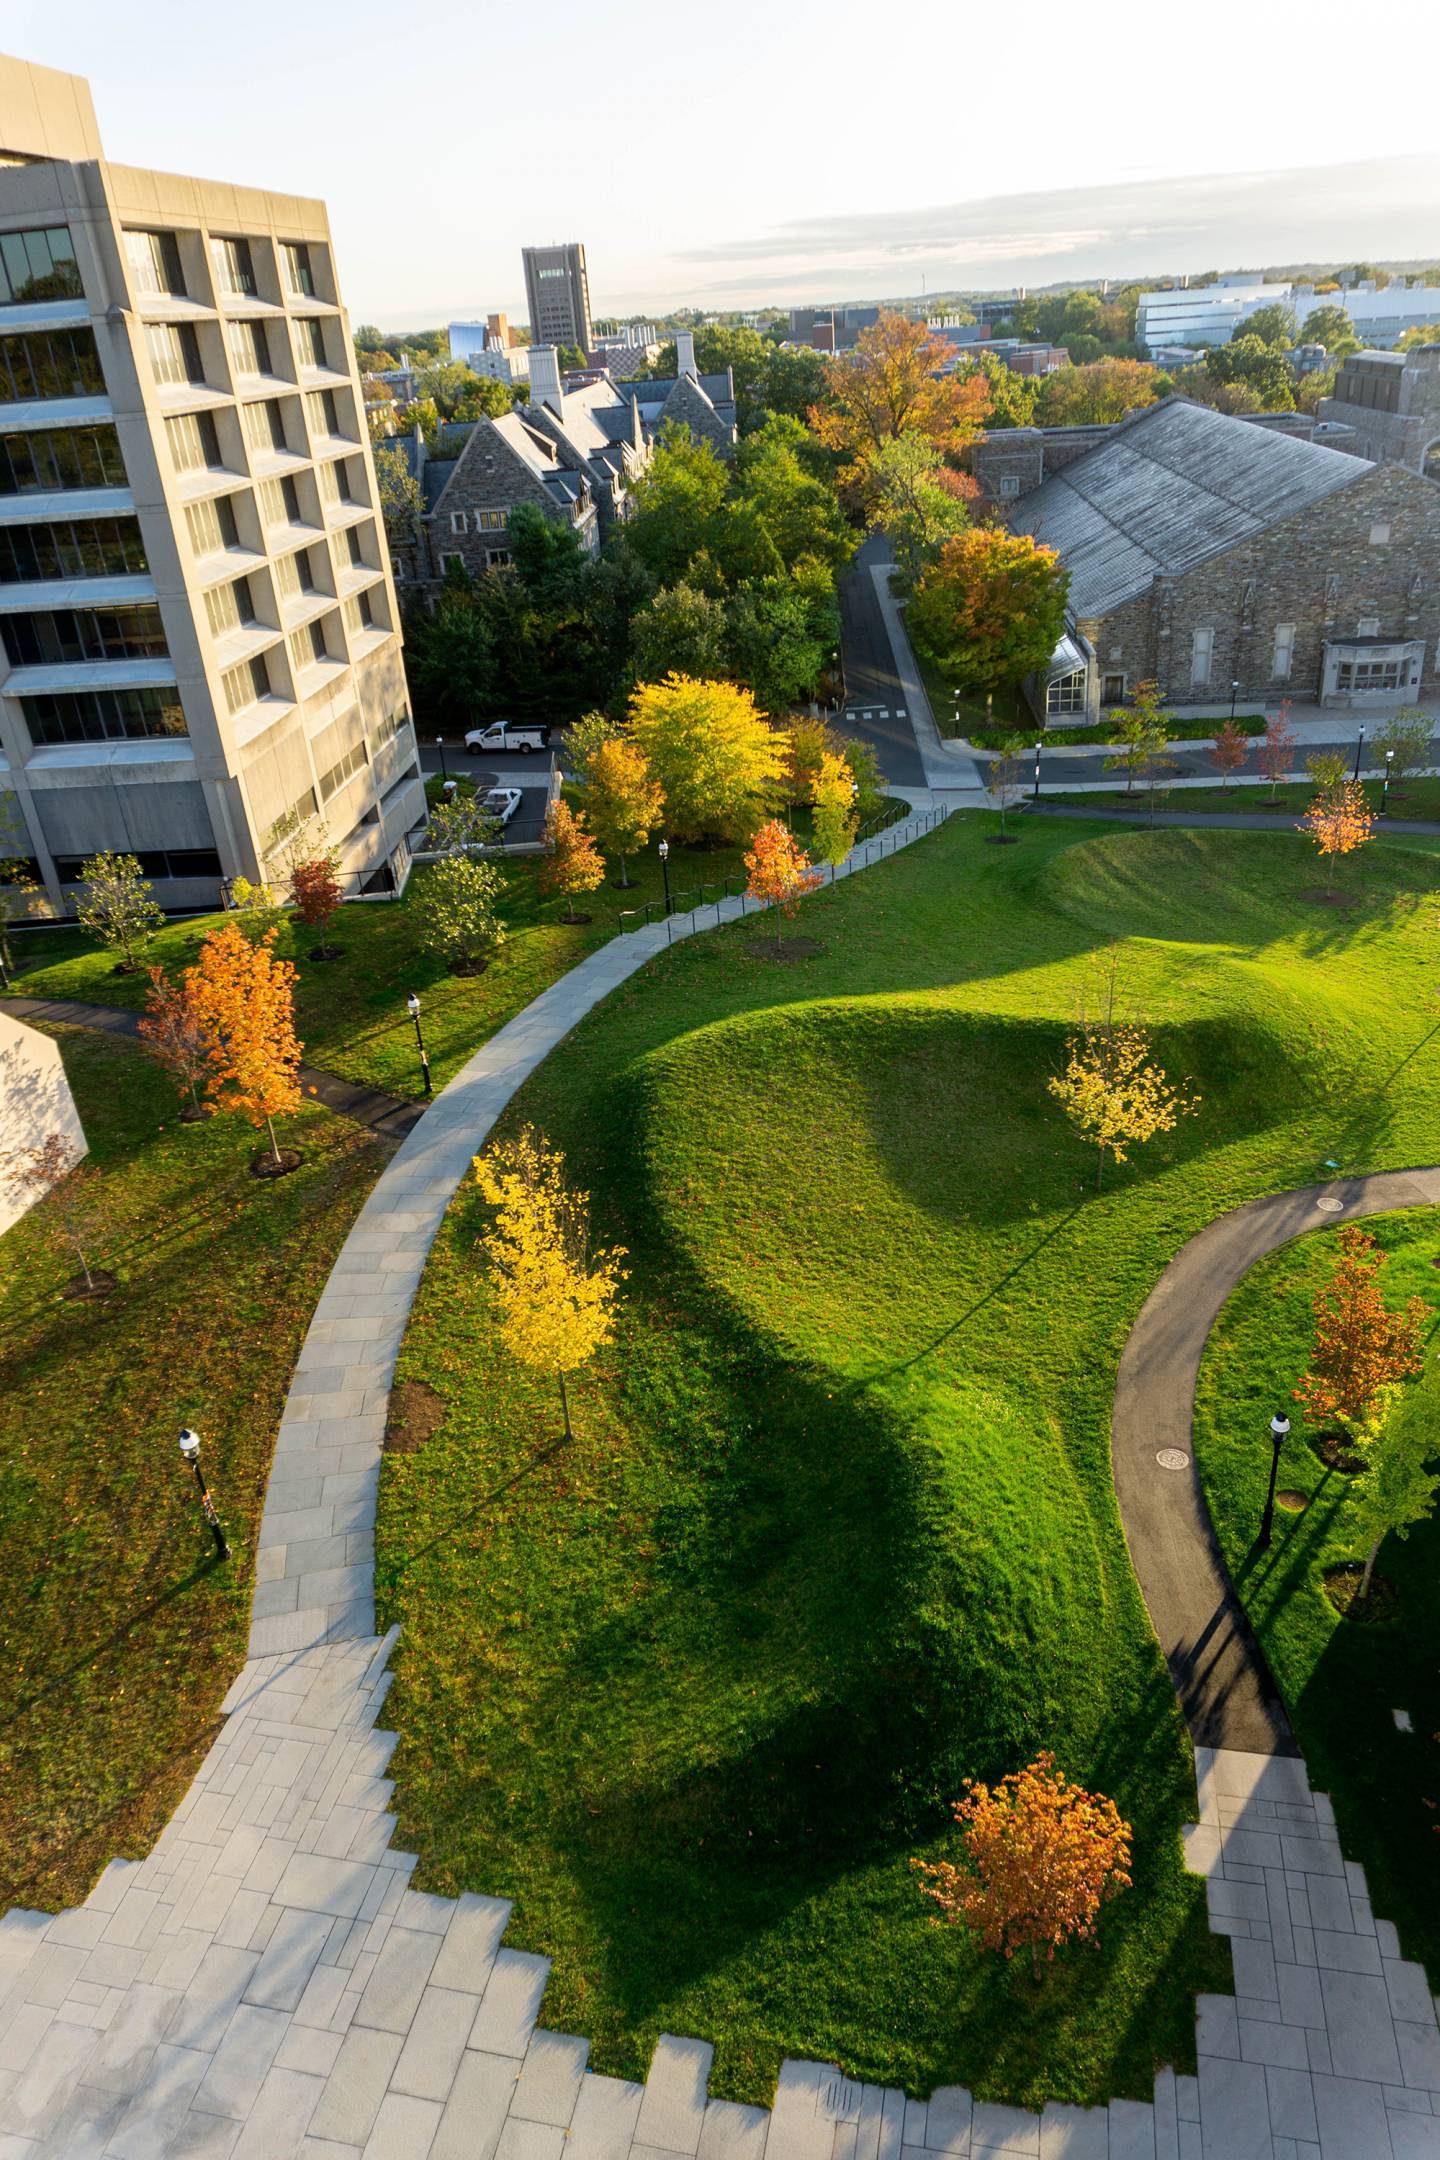 An aerial view of the landscaping for Maya Lin's environmental installation